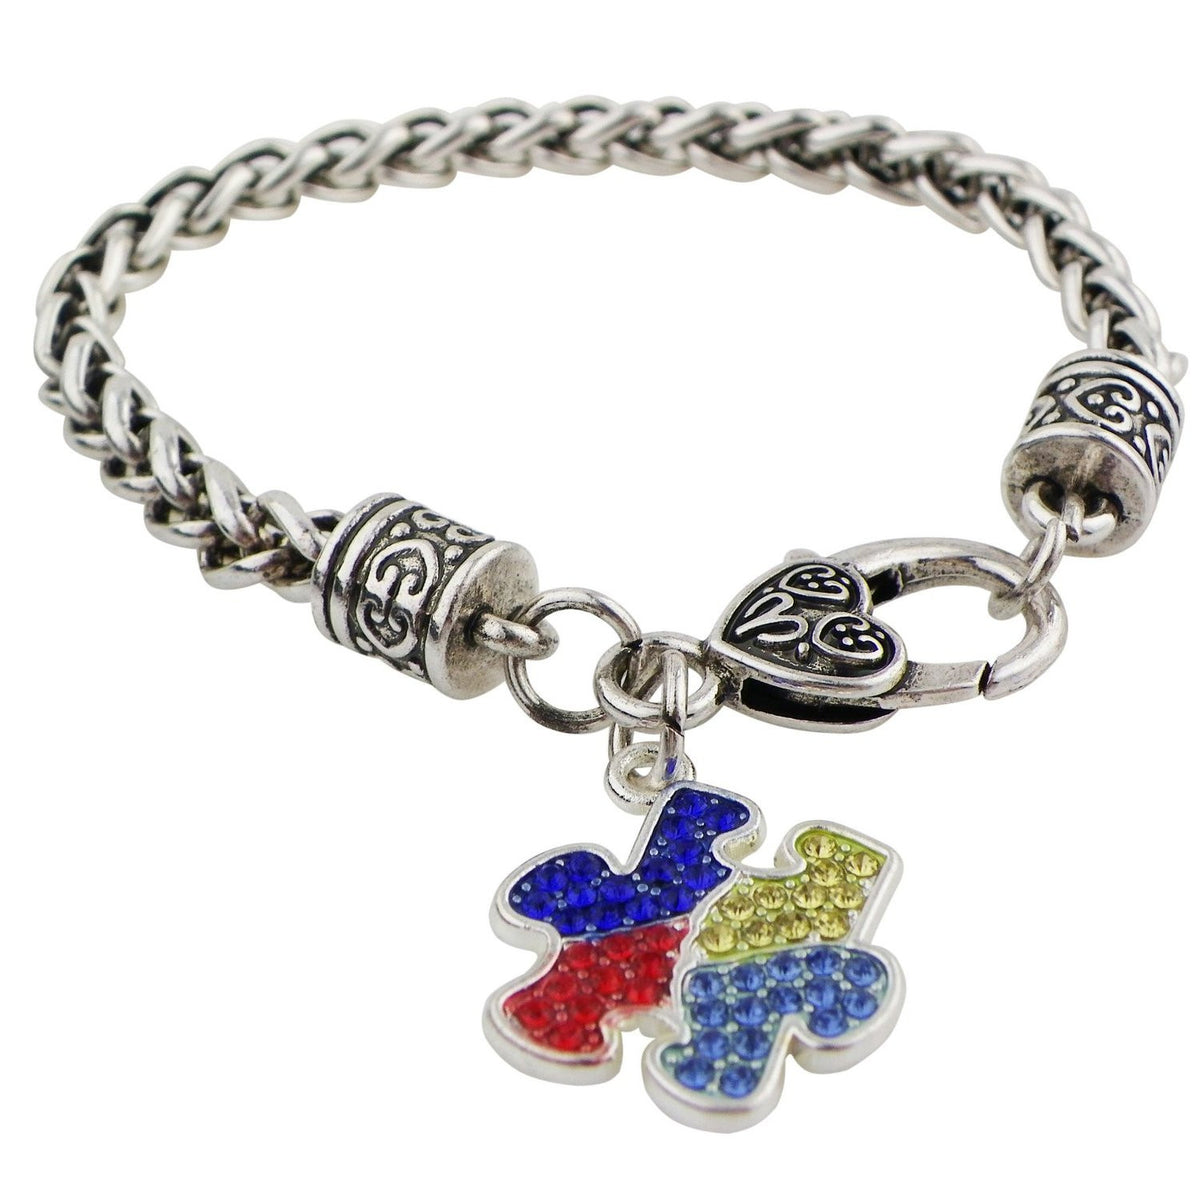 Rosemarie Collections Supports Autism Awareness Day